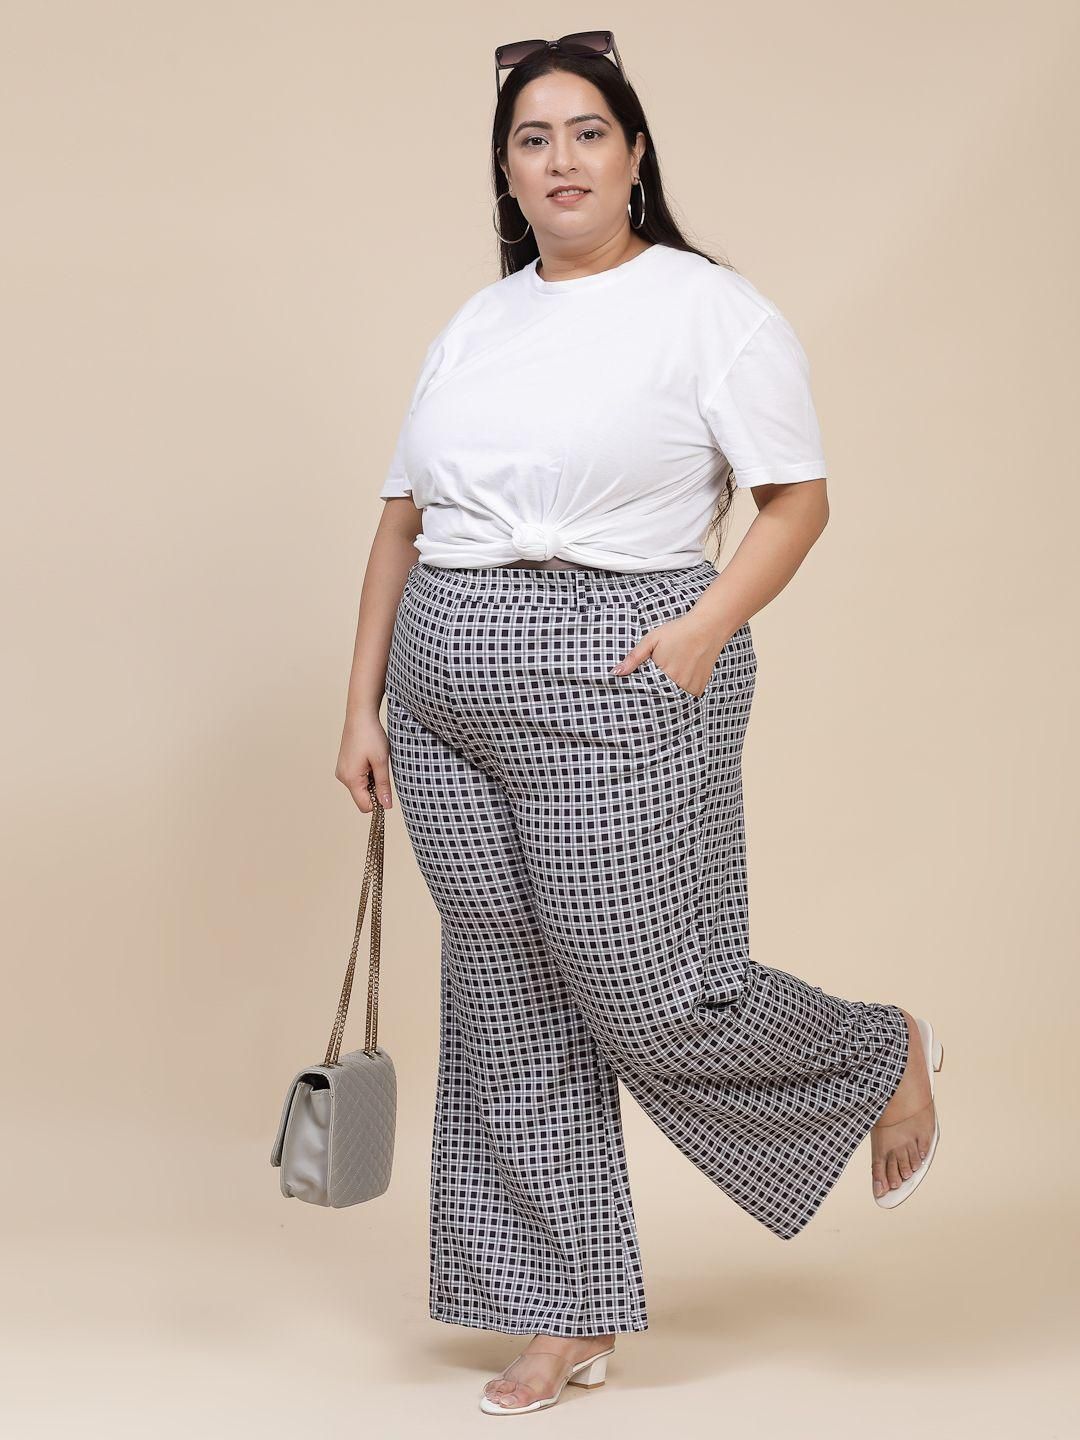 Flambeur Women's Plus Size Casual Checkered Print Trouser